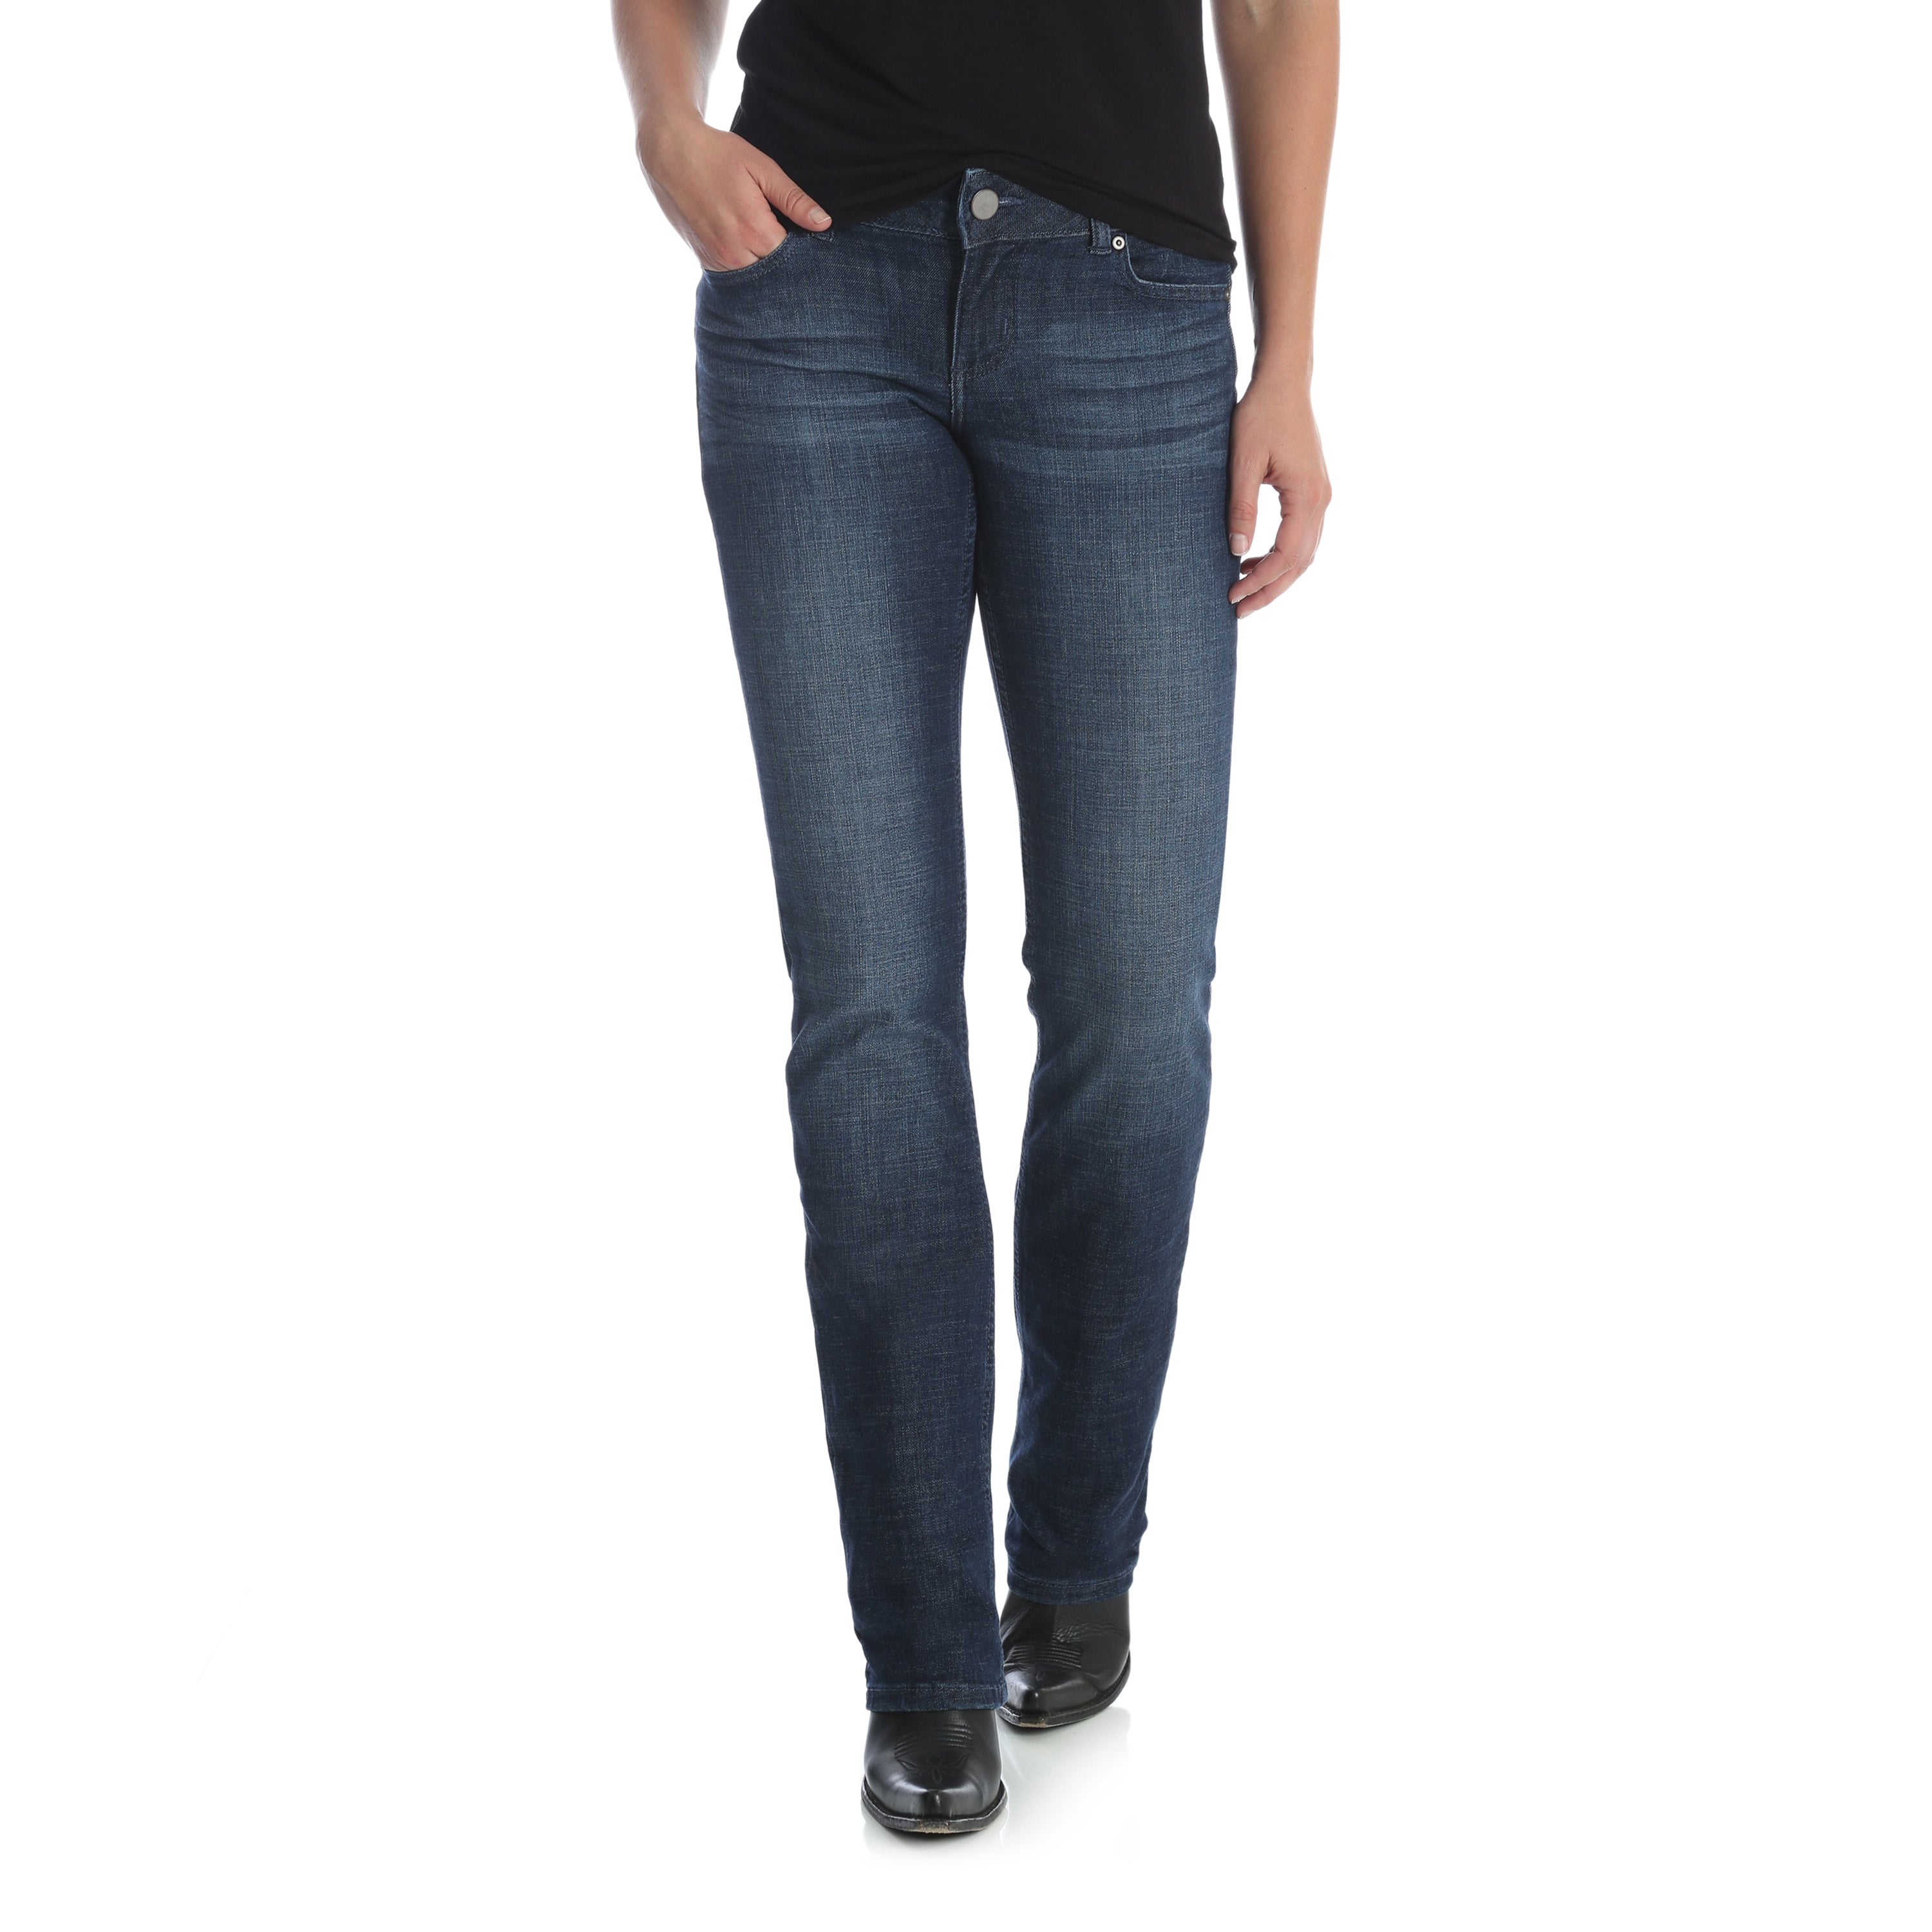 Women's Stretch Jeans, Skinny, Cropped, Bootcut